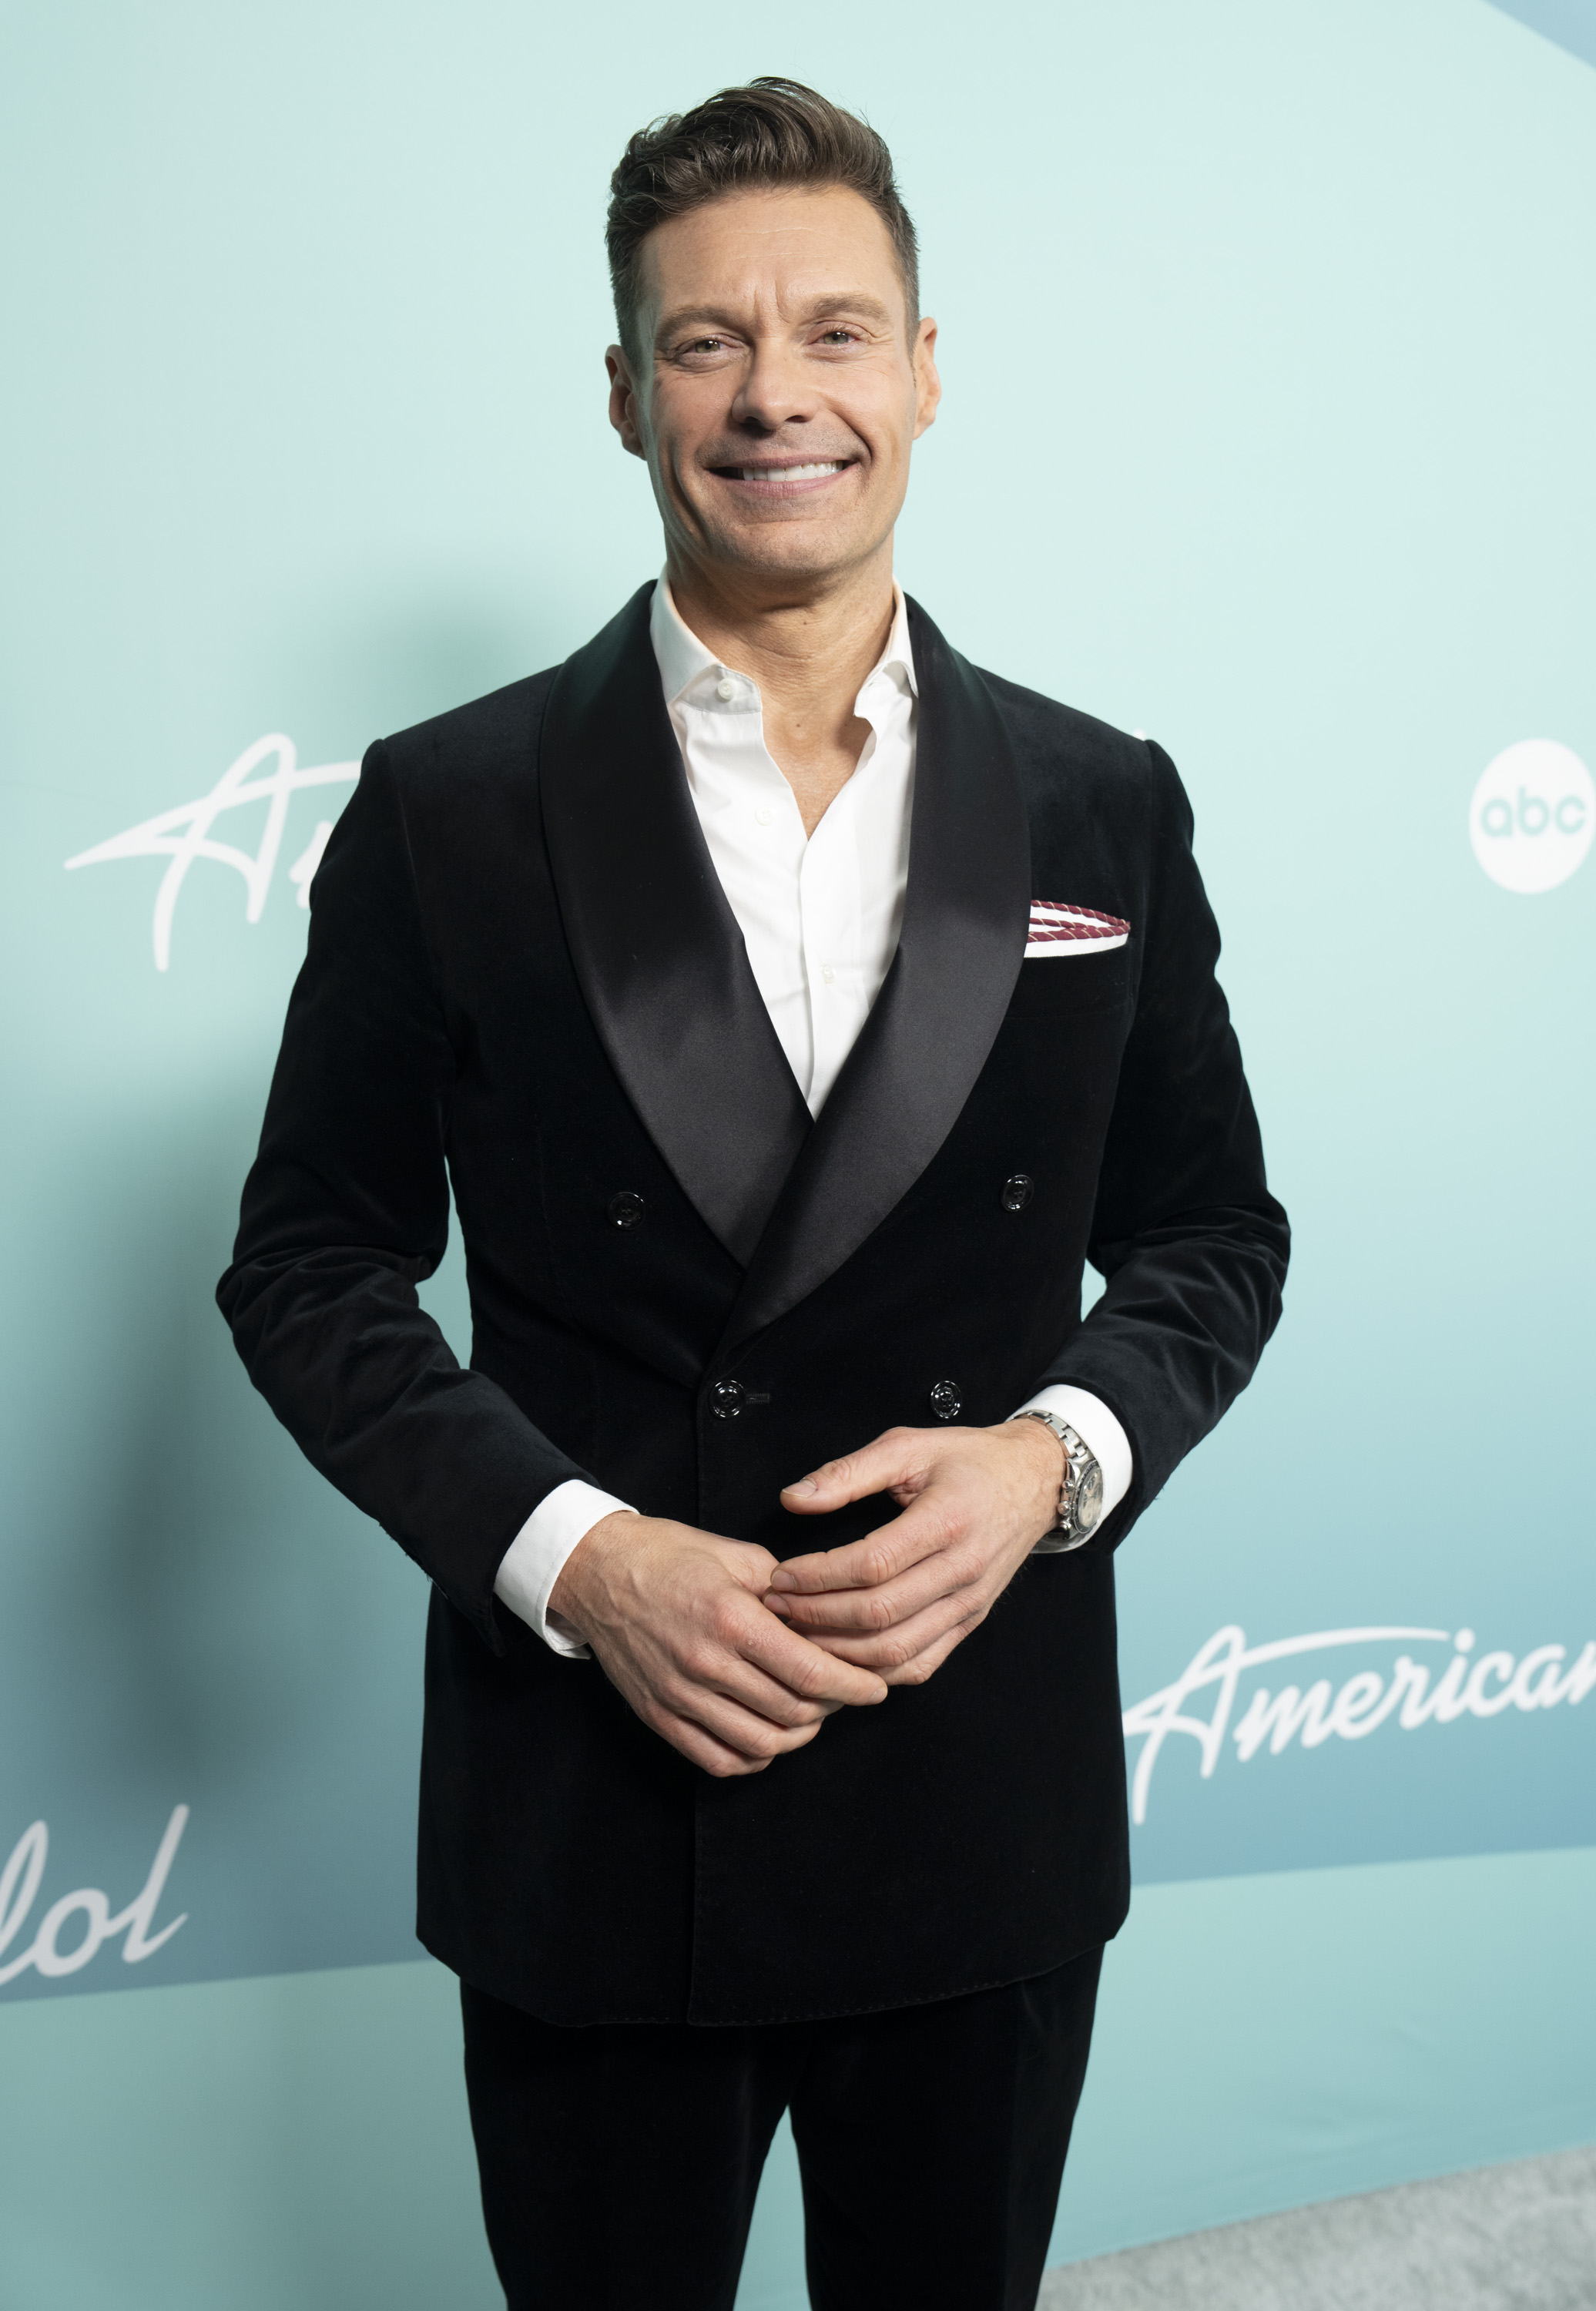 On May 19, Ryan Seacrest attended the American Idol finale